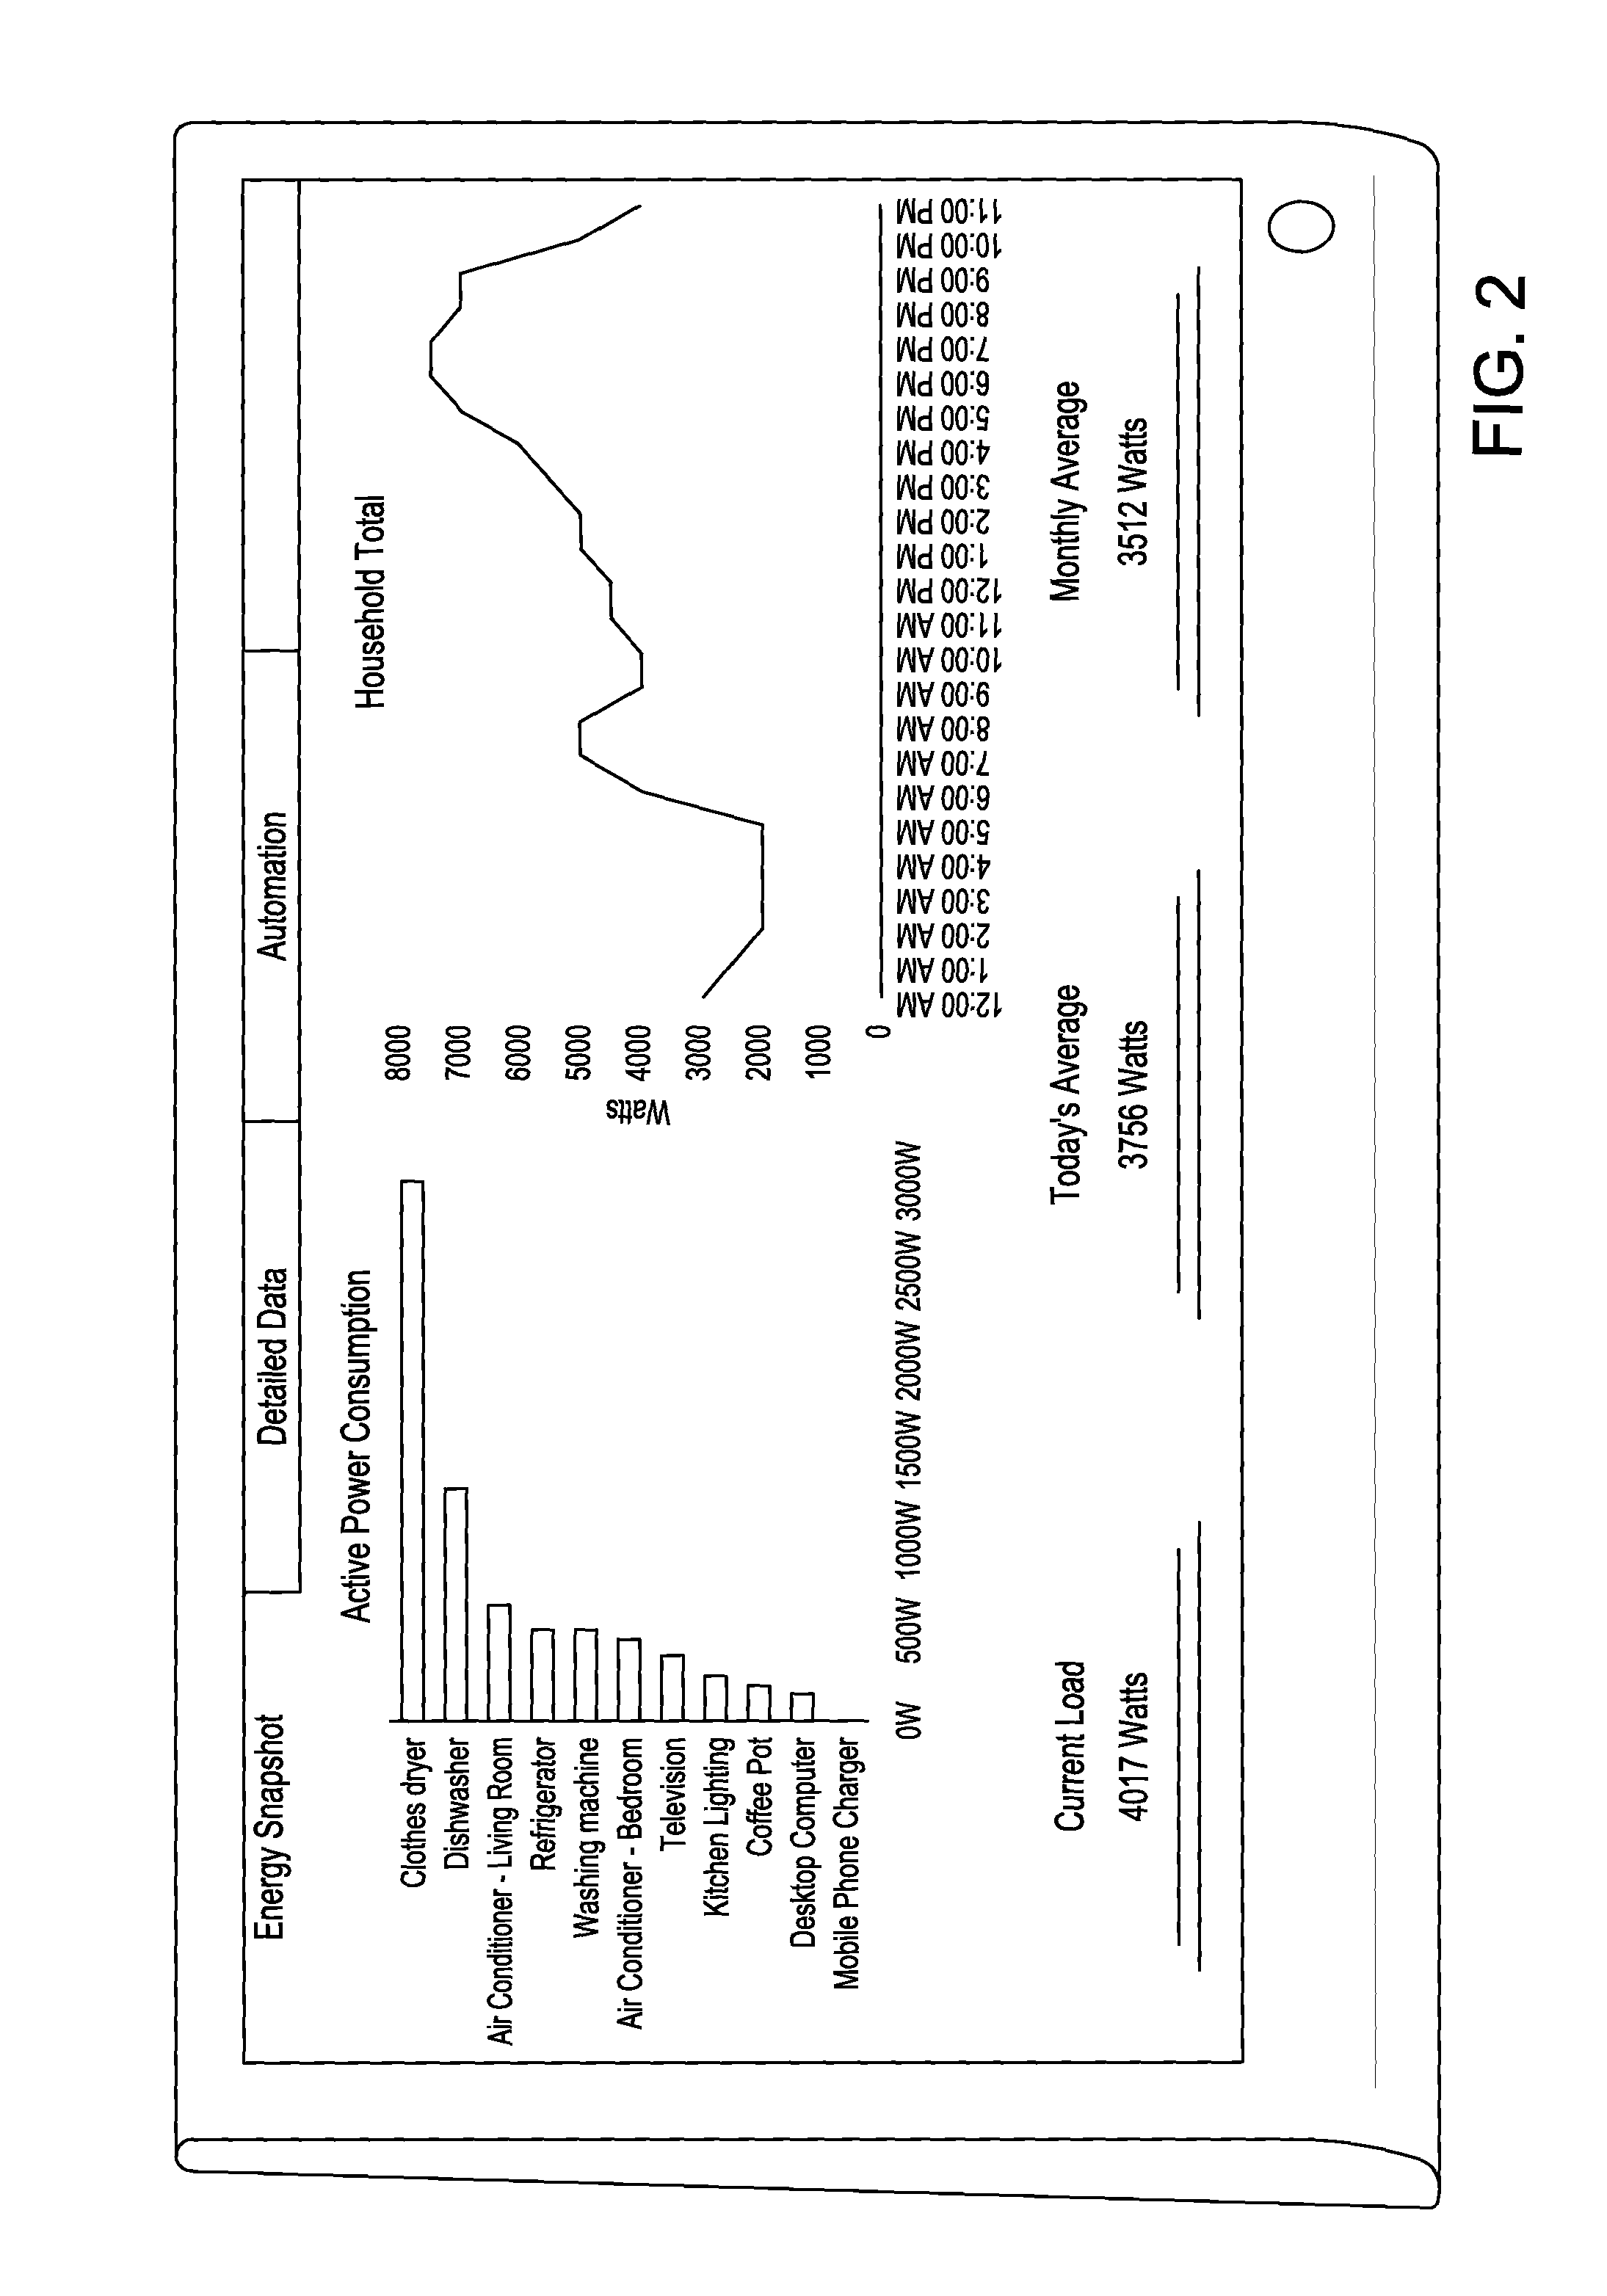 System and method for home energy monitor and control